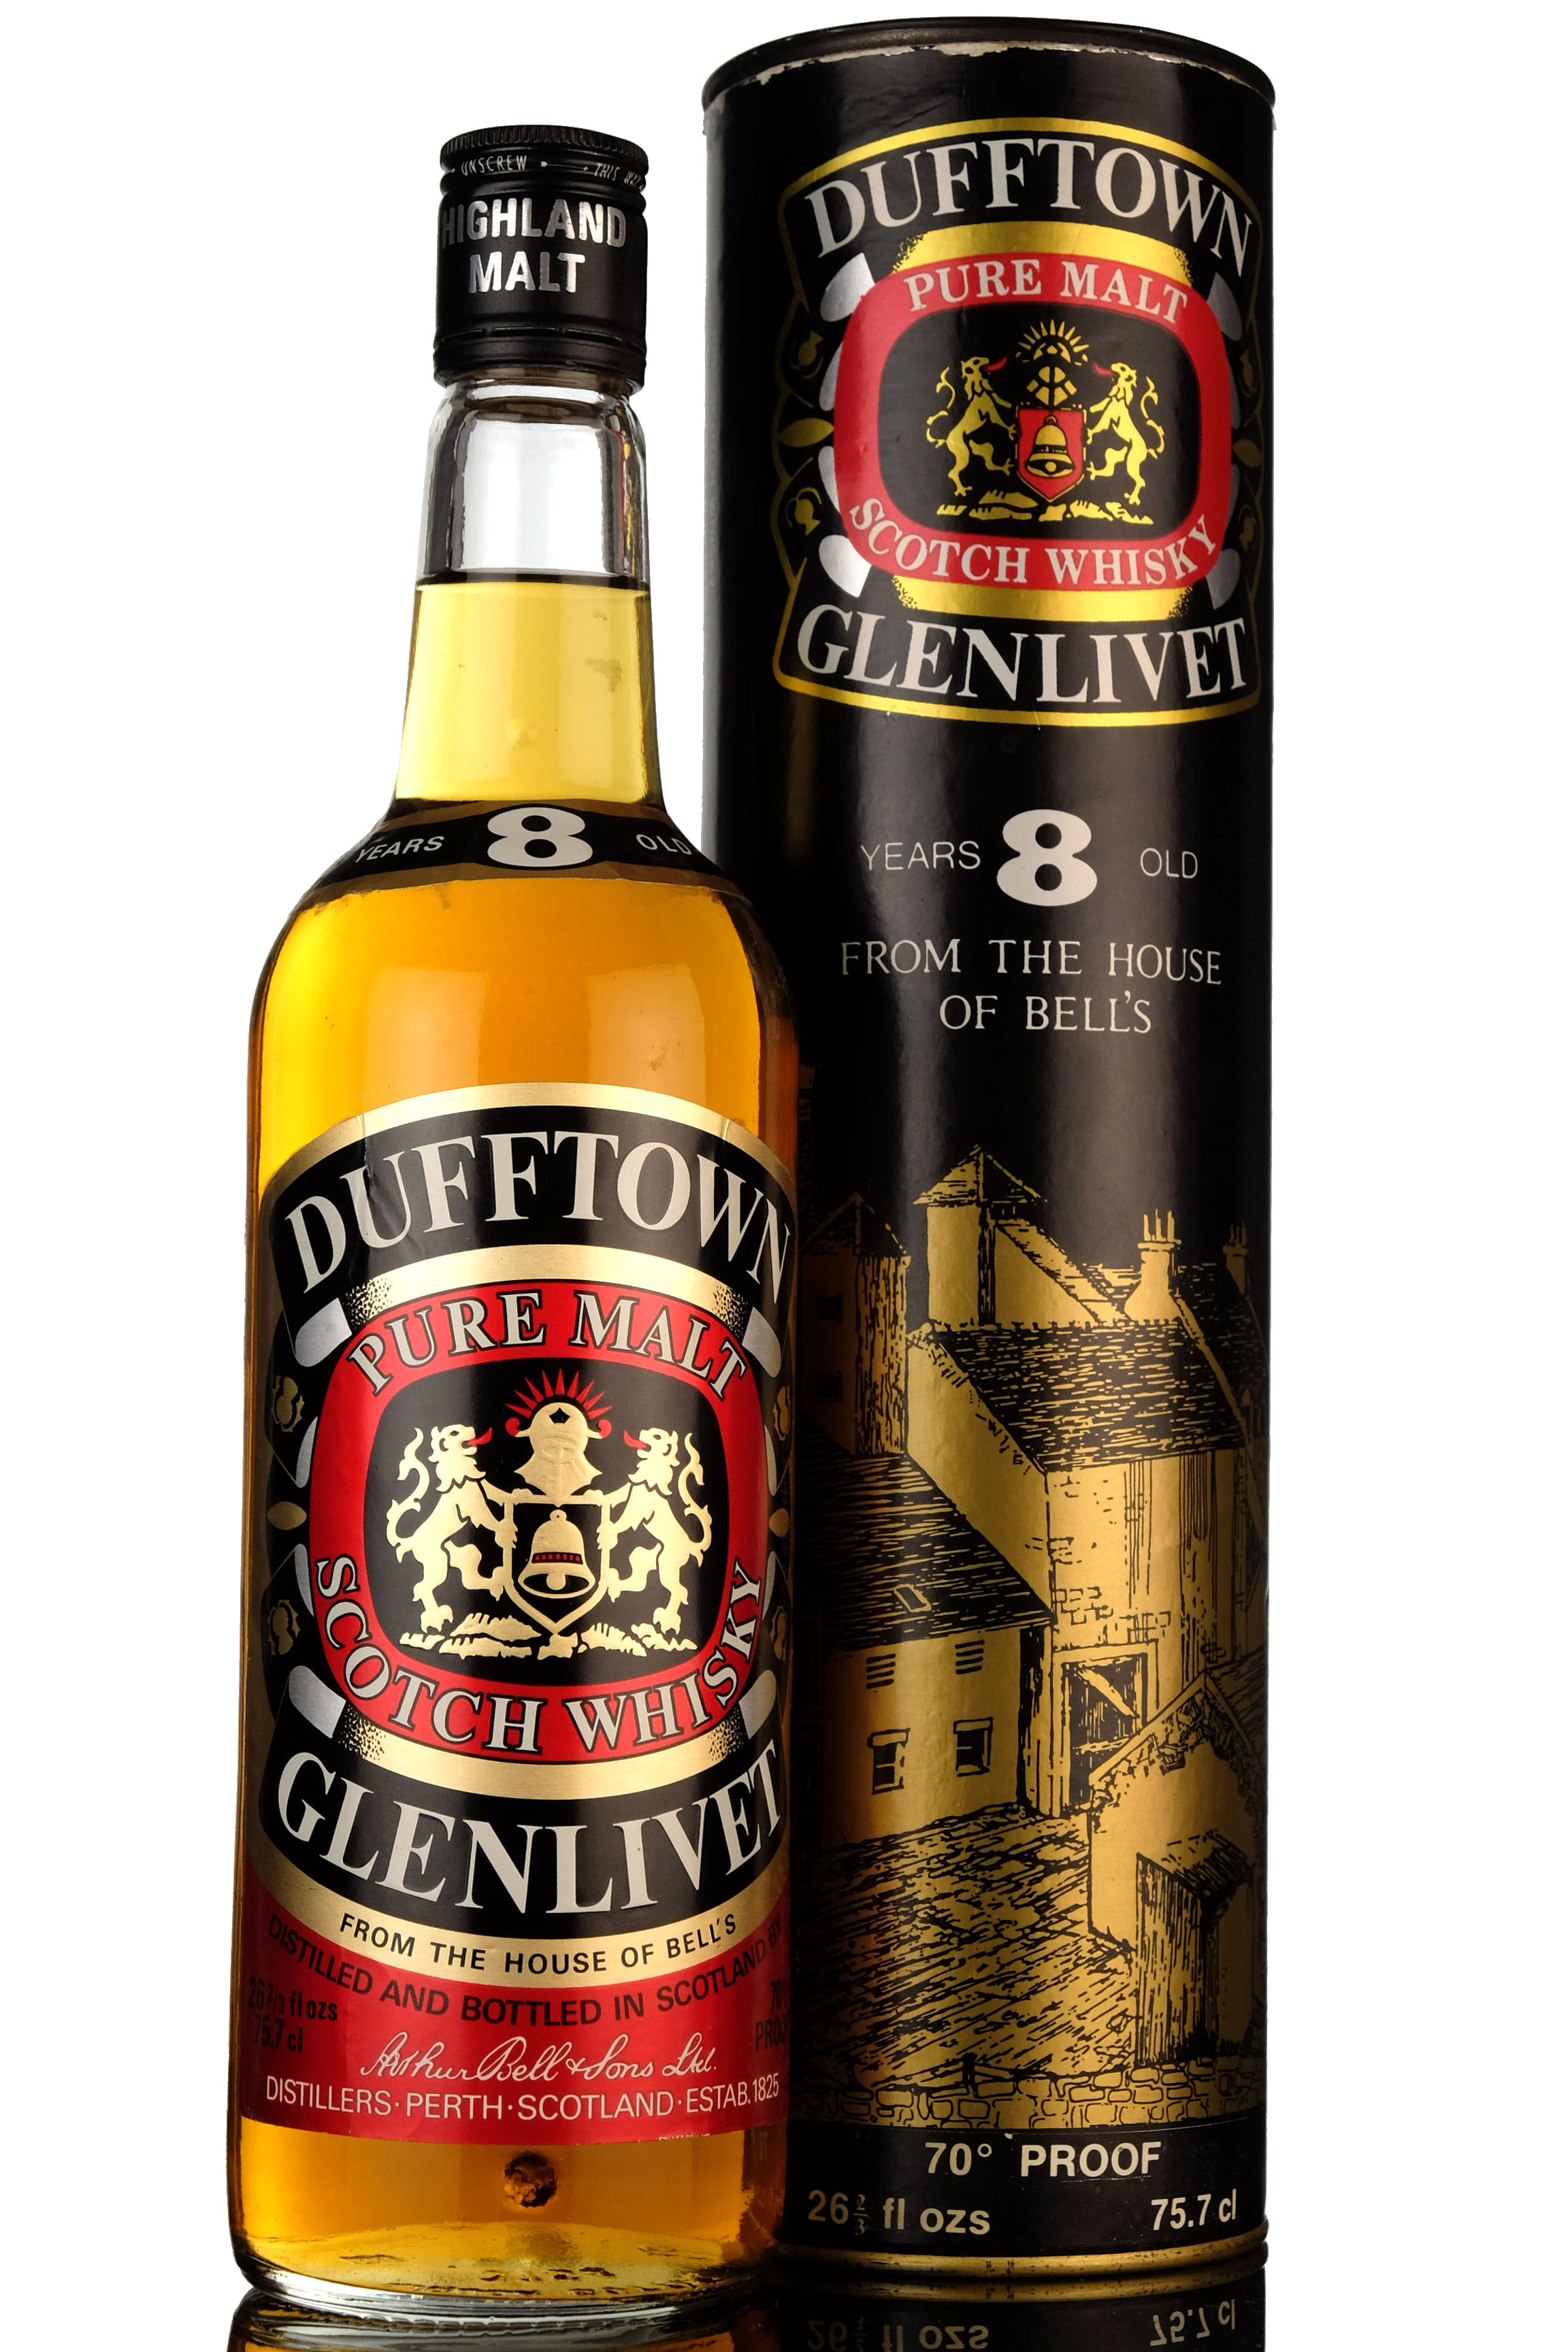 Dufftown-Glenlivet 8 Year Old - Late 1970s